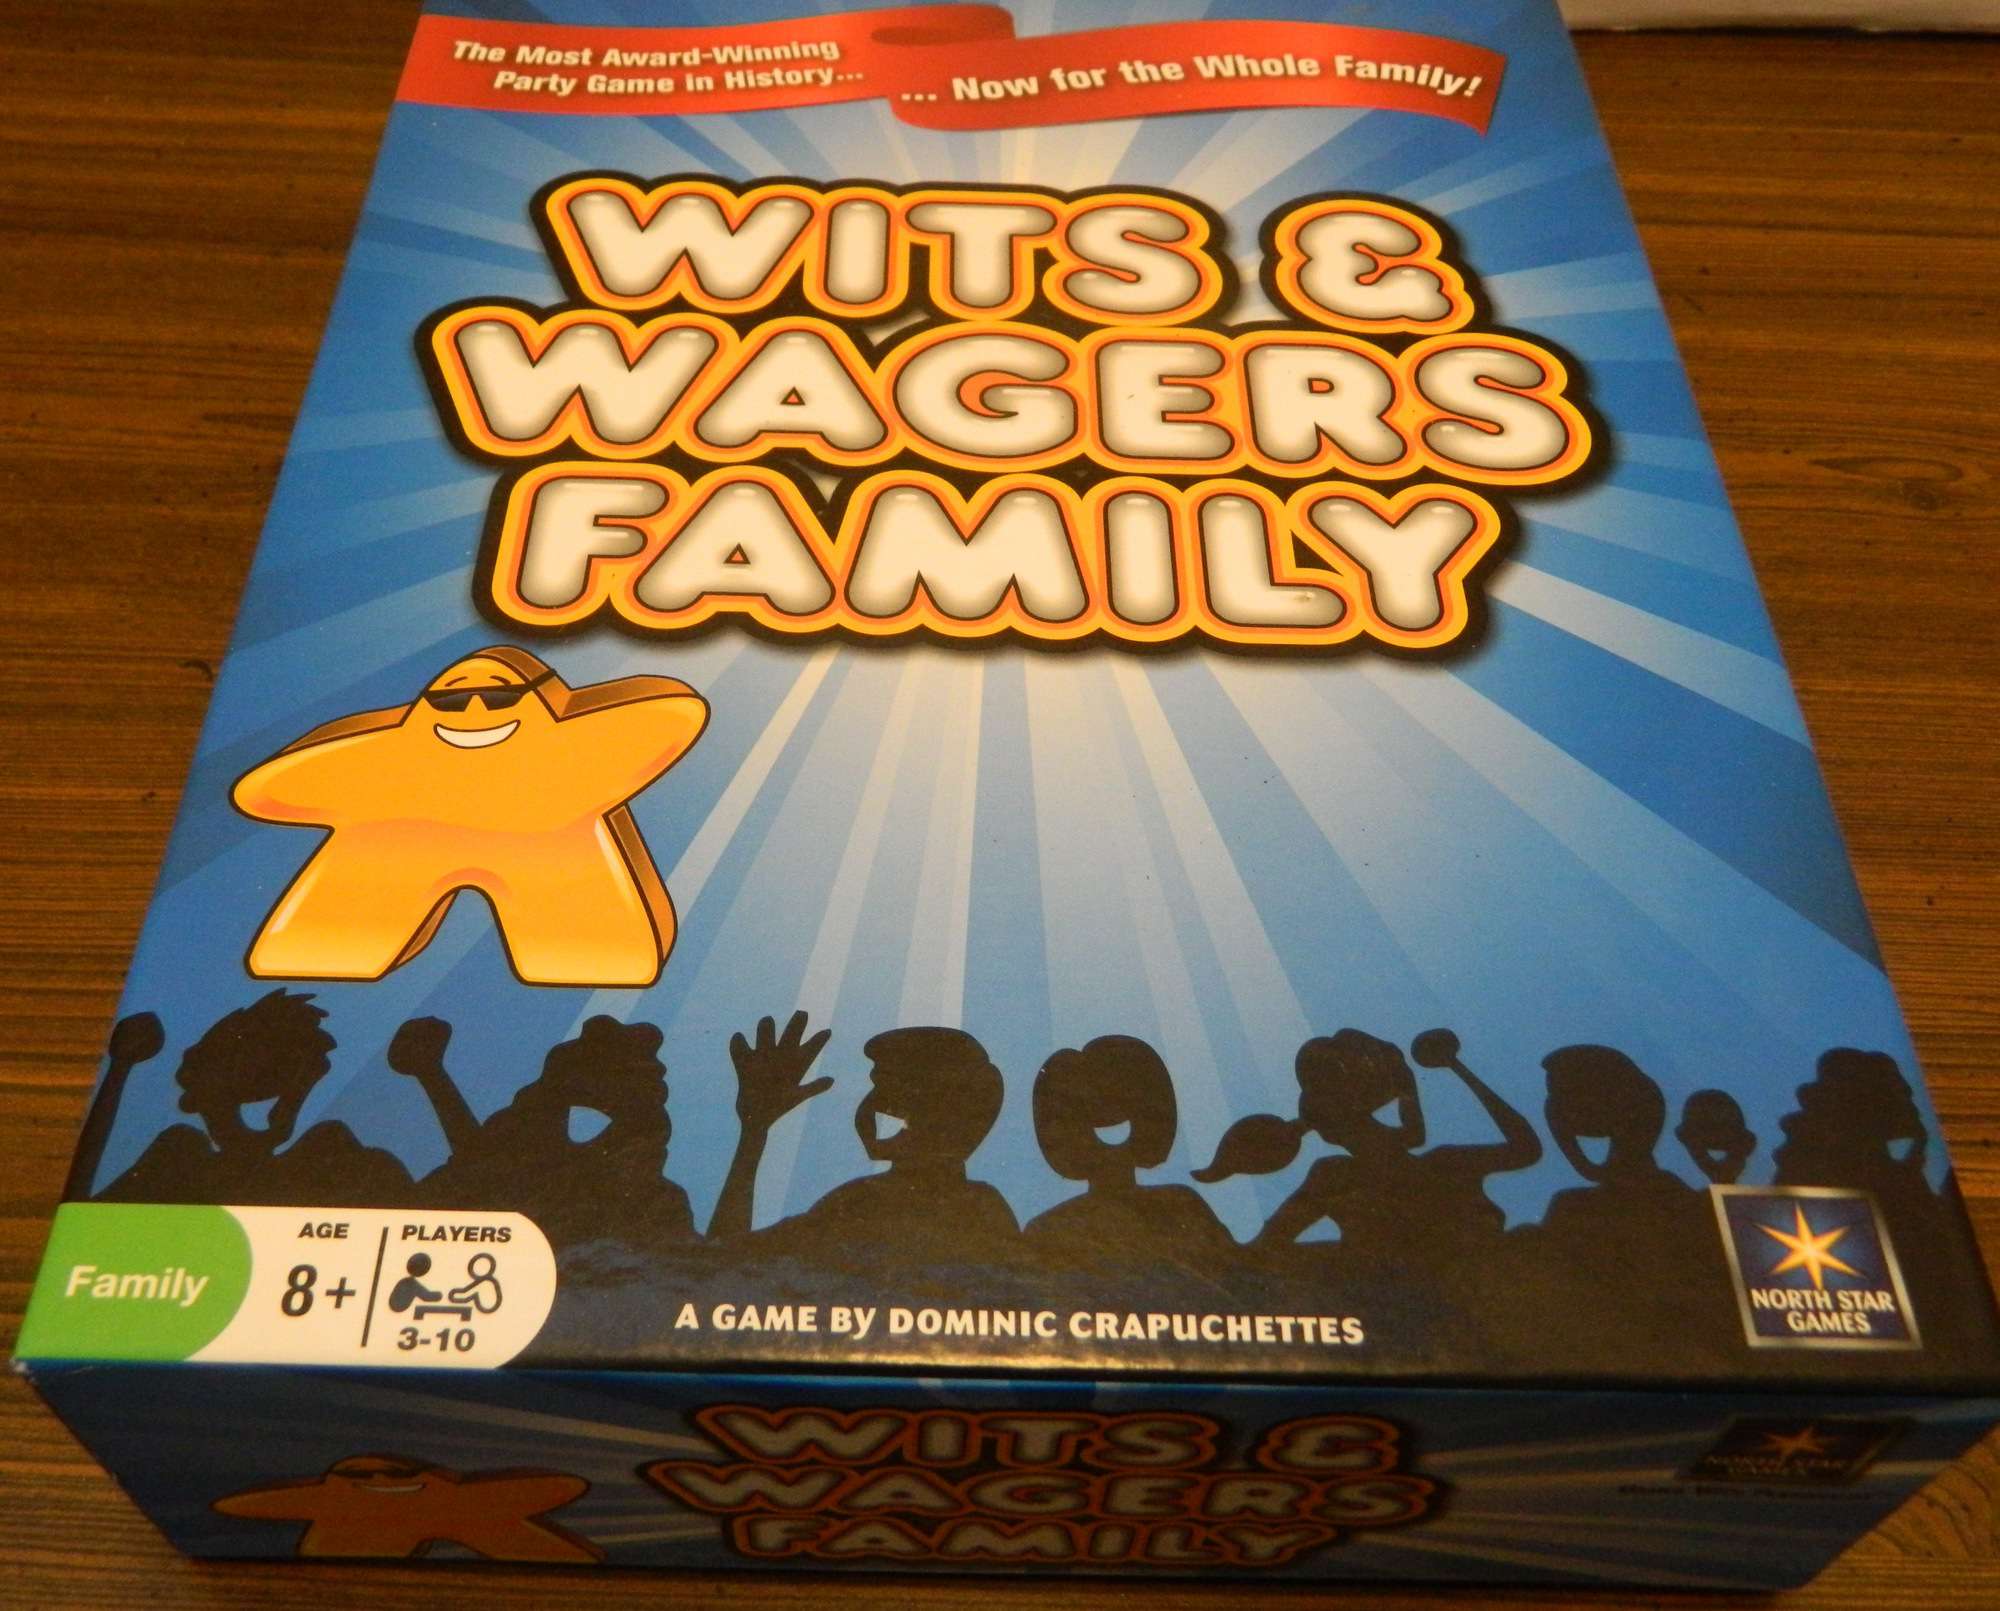 Box for Wits & Wagers Family